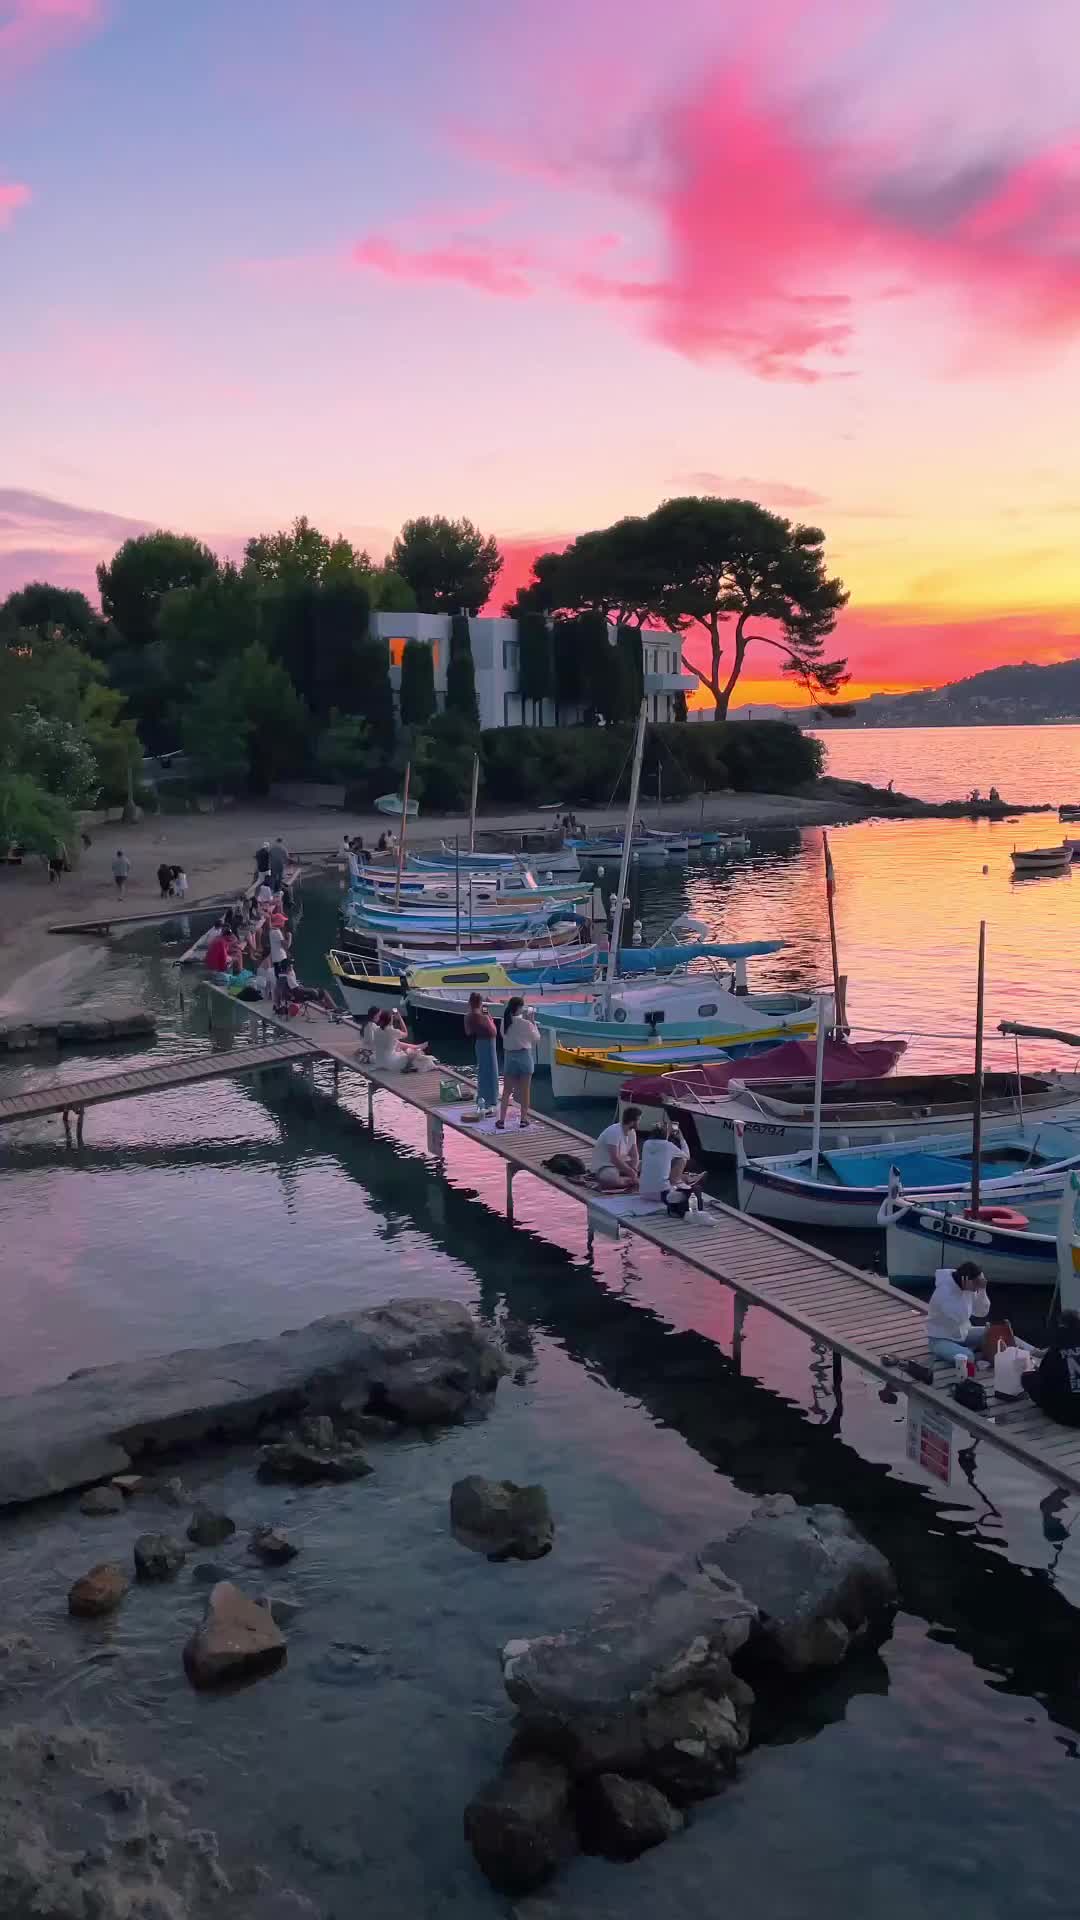 Perfect Sunset Viewing Spot at Port de l’Olivette, Antibes